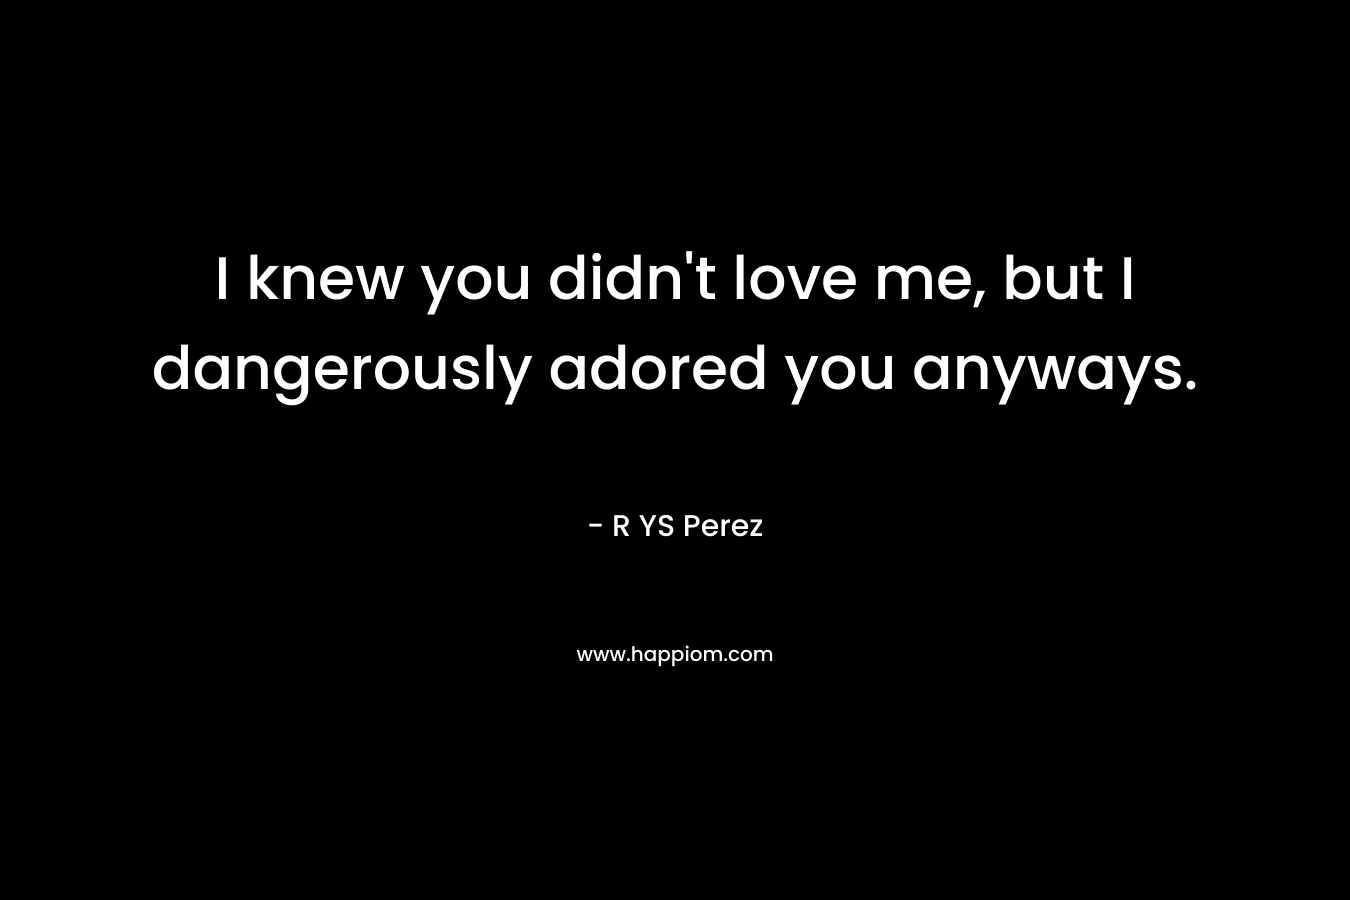 I knew you didn’t love me, but I dangerously adored you anyways. – R YS Perez